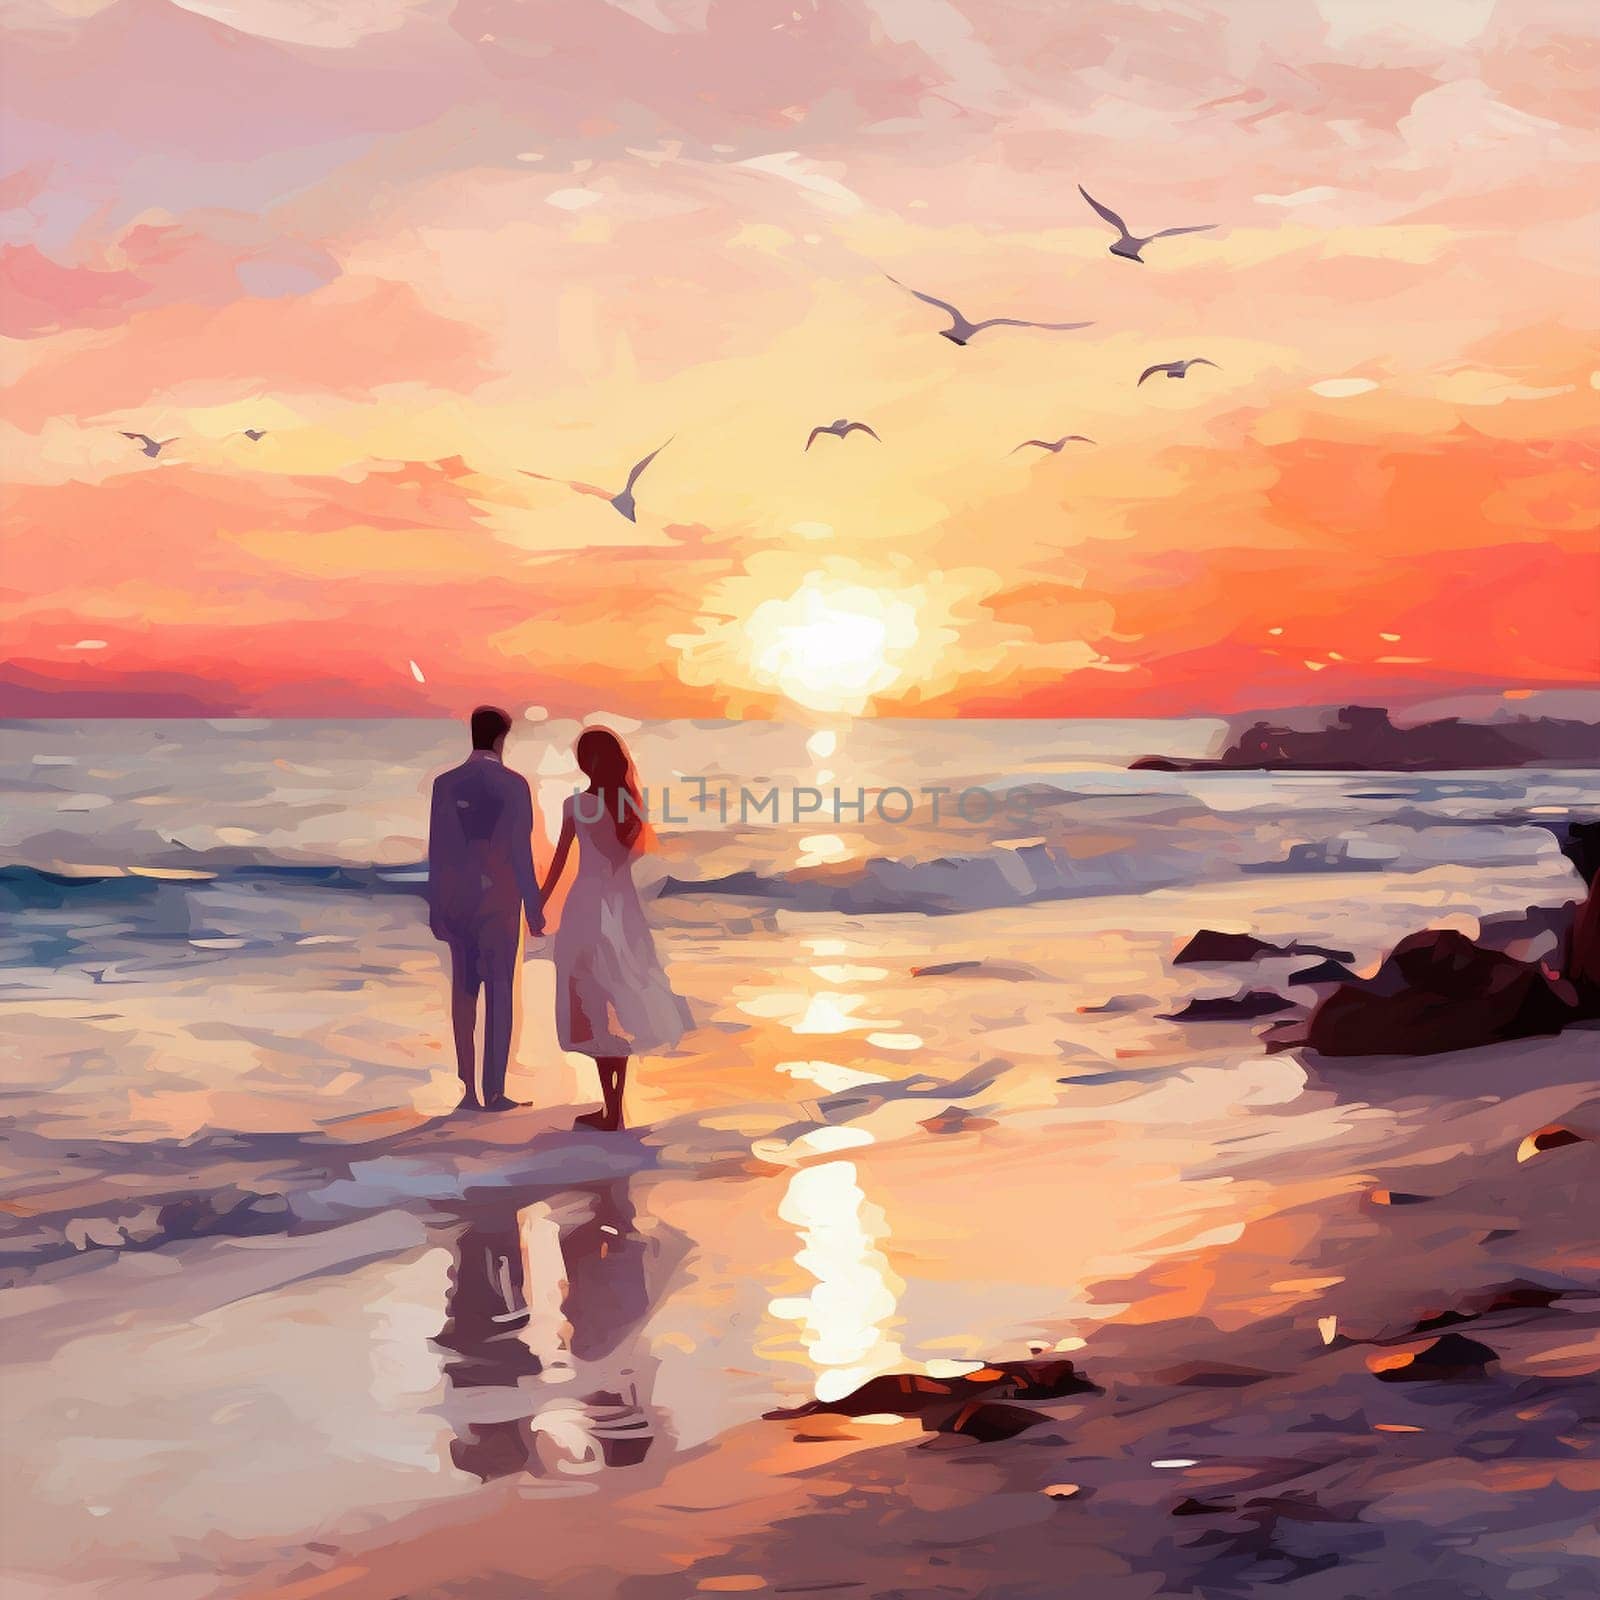 Serene Beach at Sunrise with a Couple Exchanging Vows by Sahin